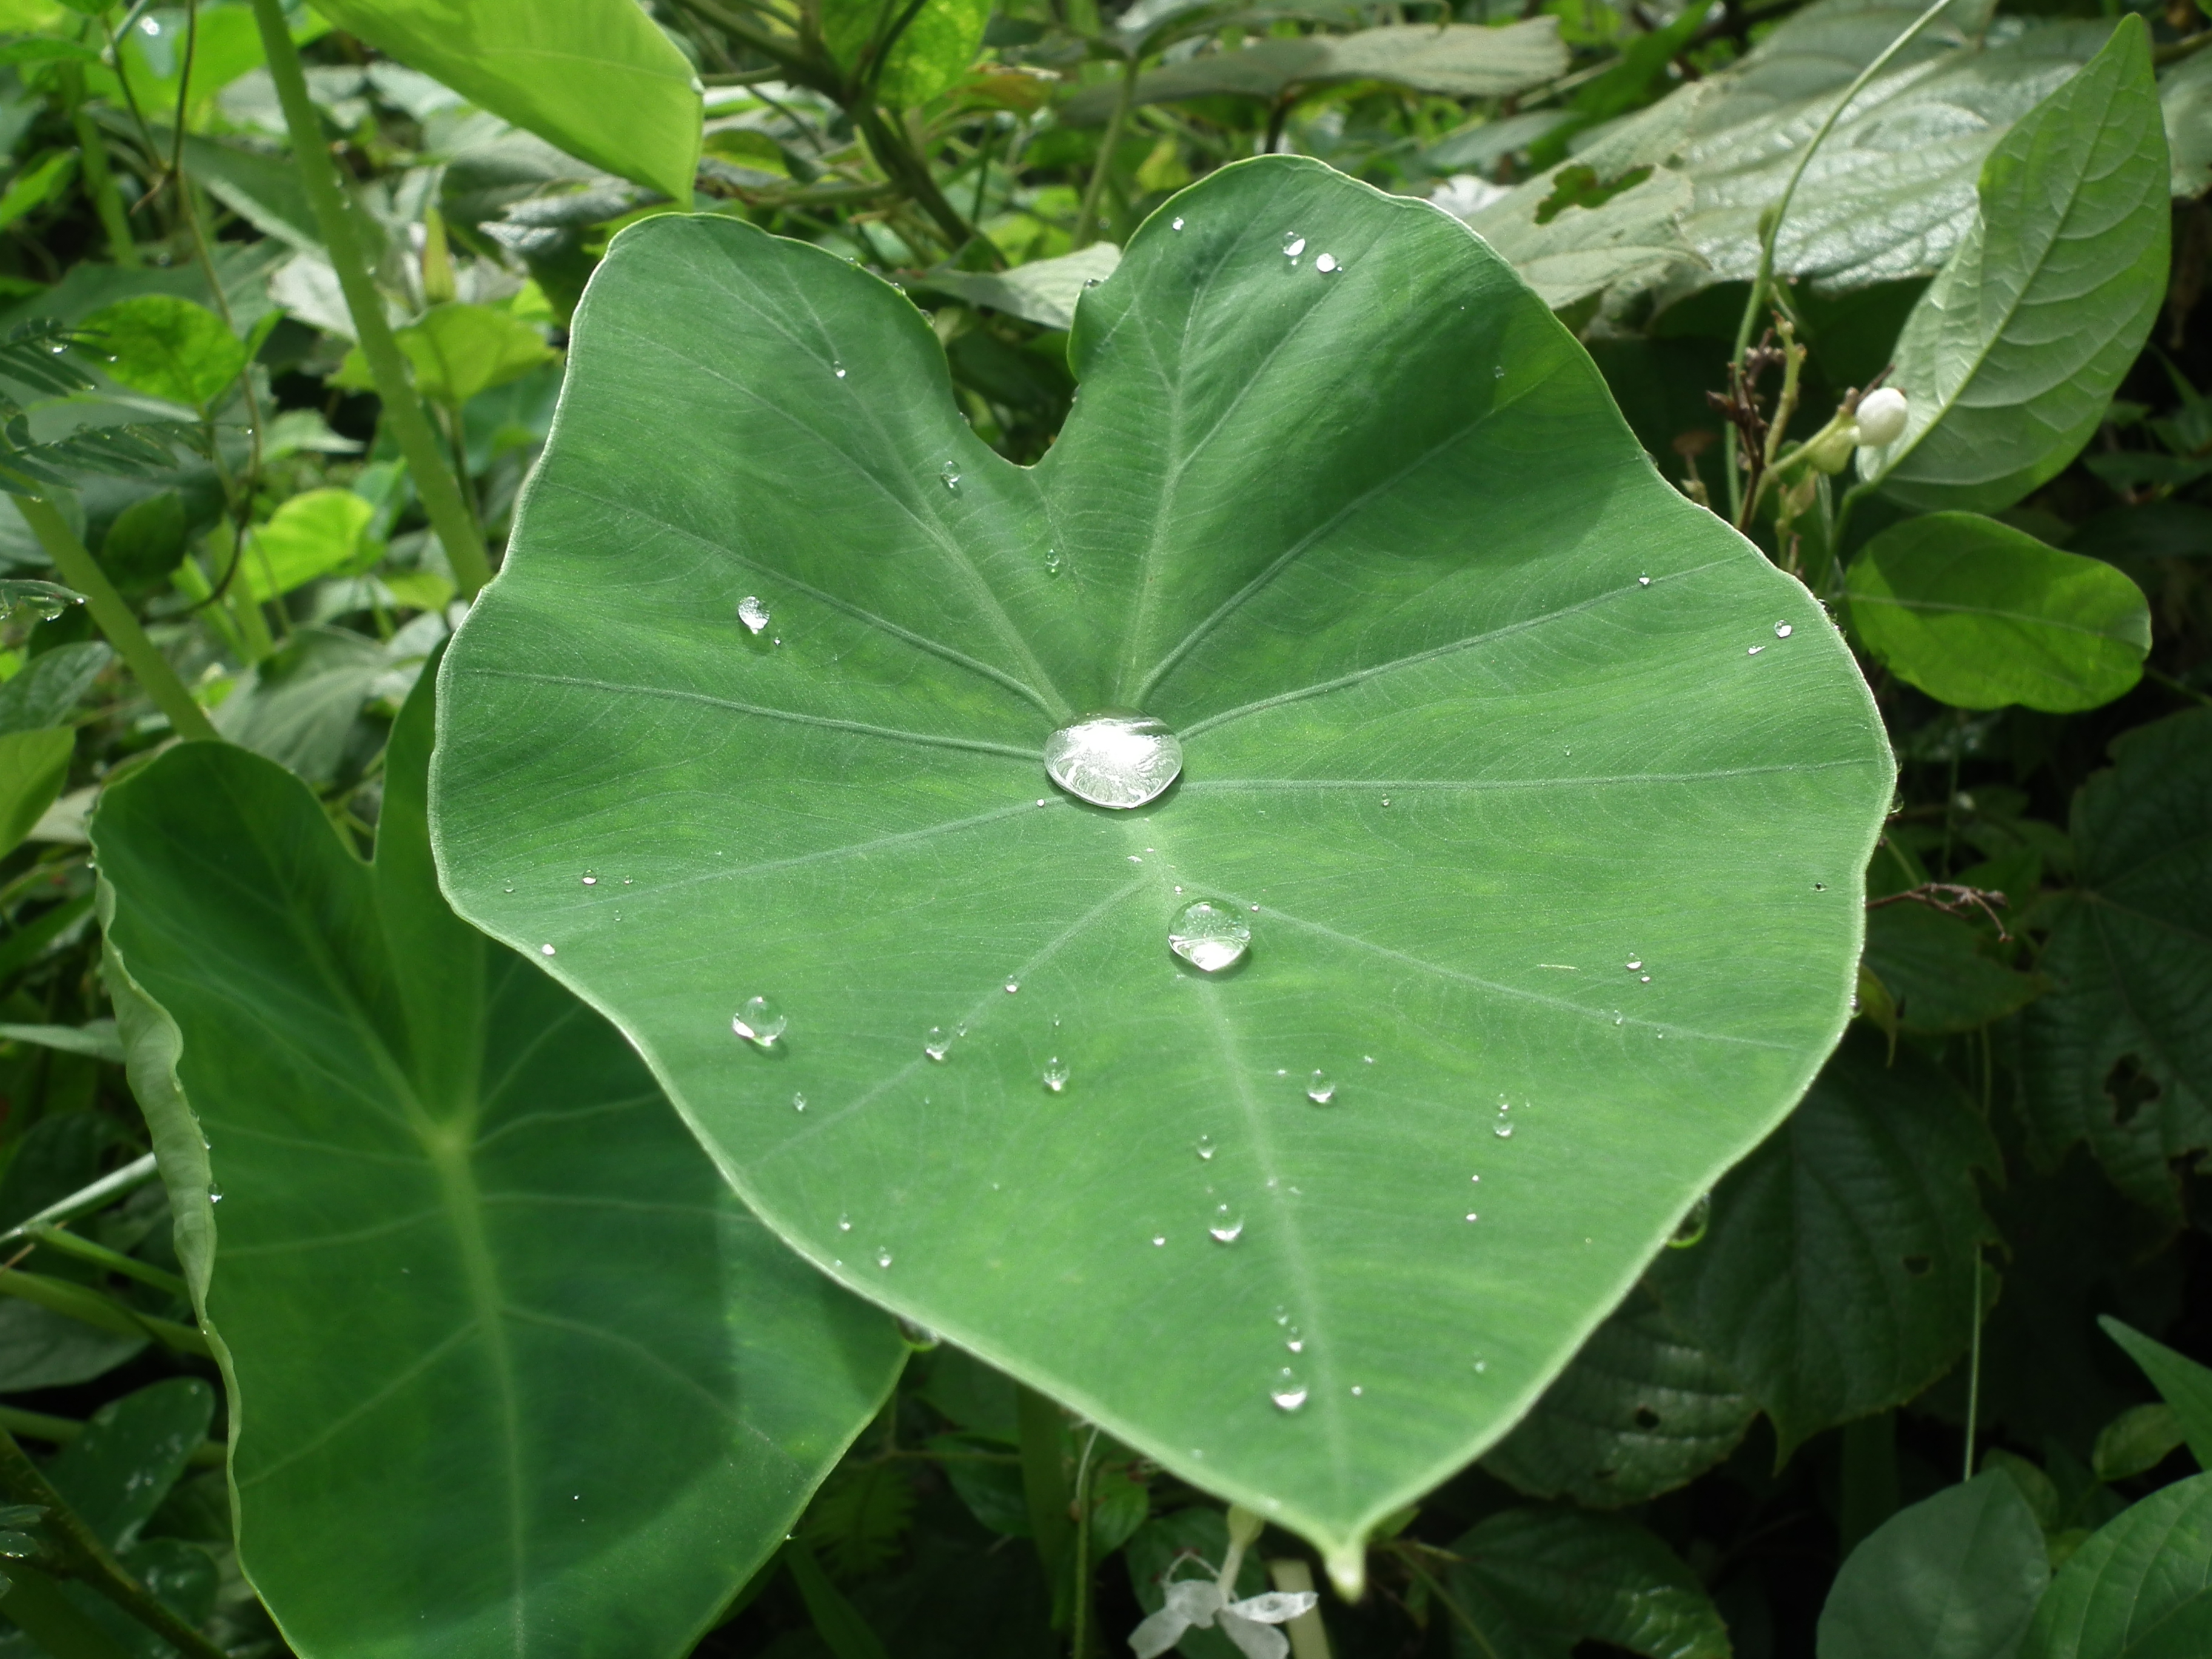 File:Colocasia plant from Kerala 5019.JPG - Wikimedia Commons